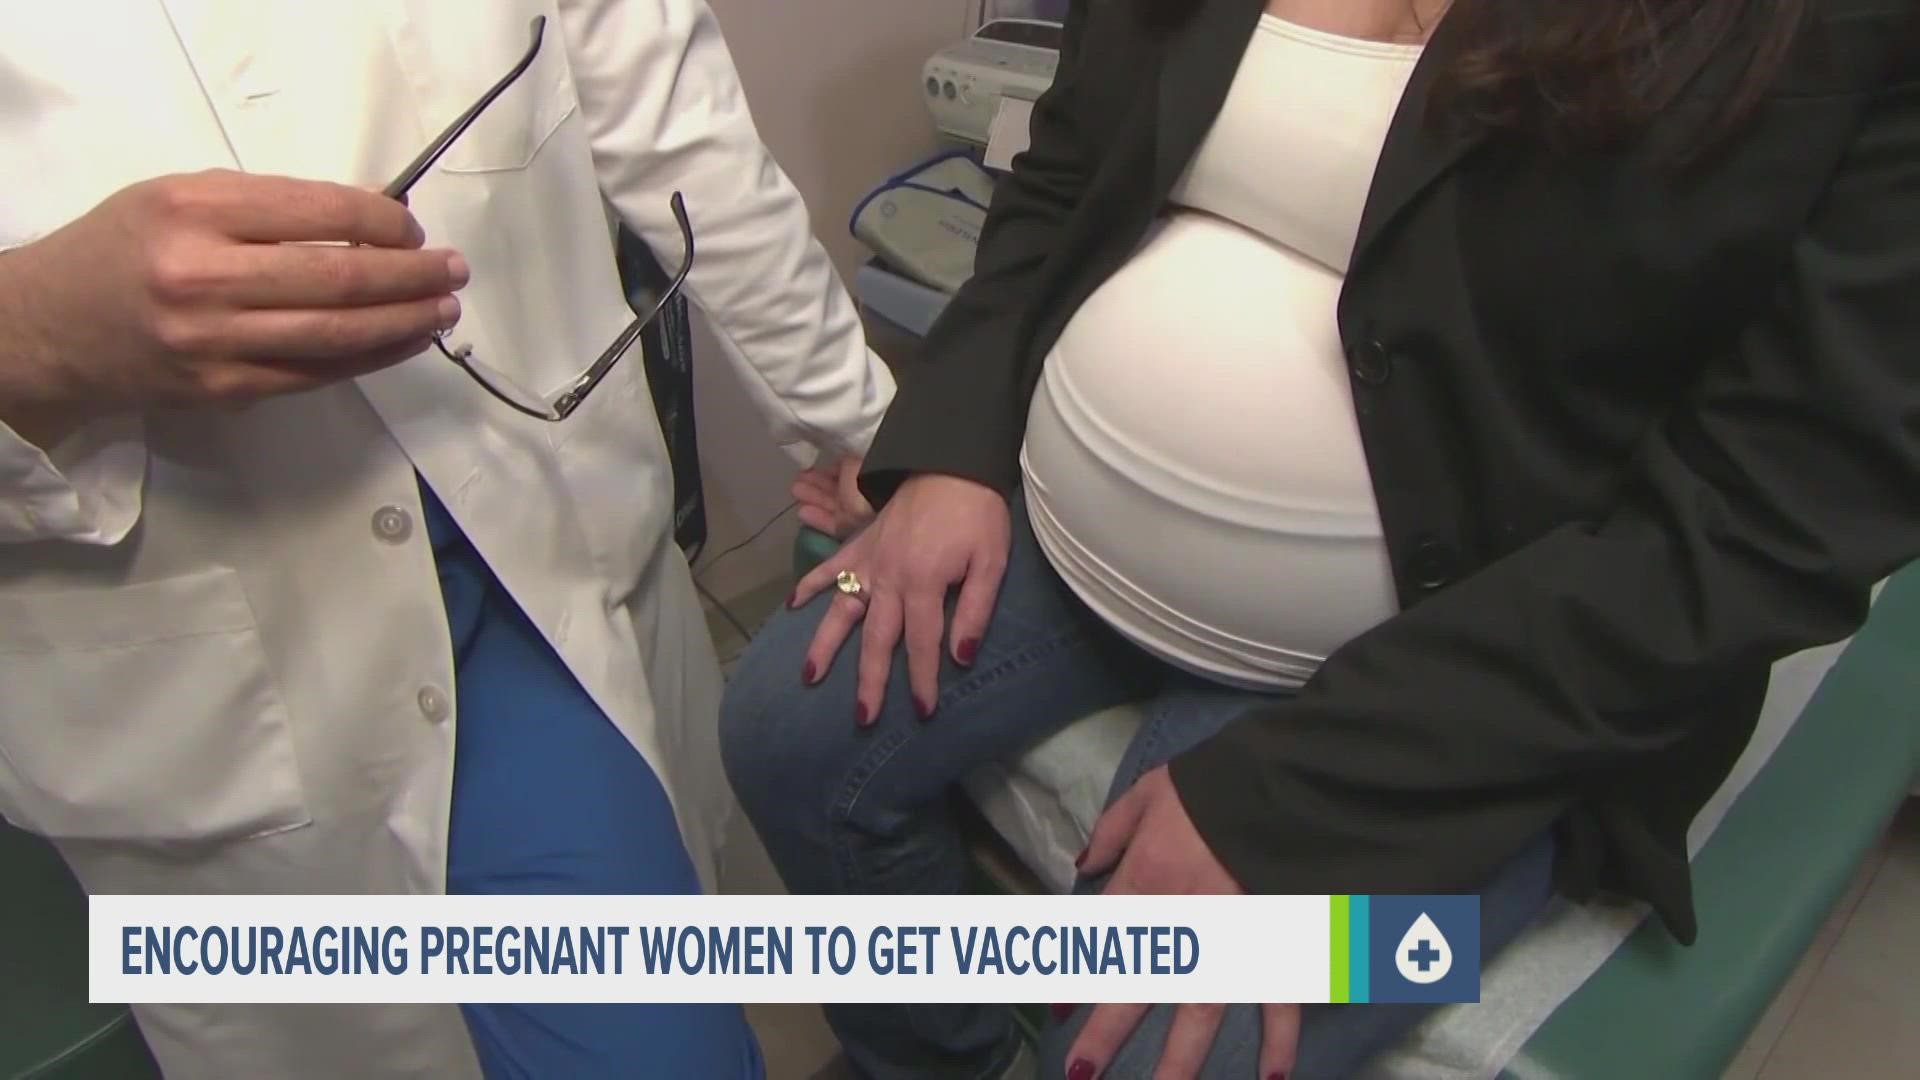 Central Iowa doctors said any vaccine, Pfizer, Johnson and Johnson, or Moderna, is OK to get while pregnant.